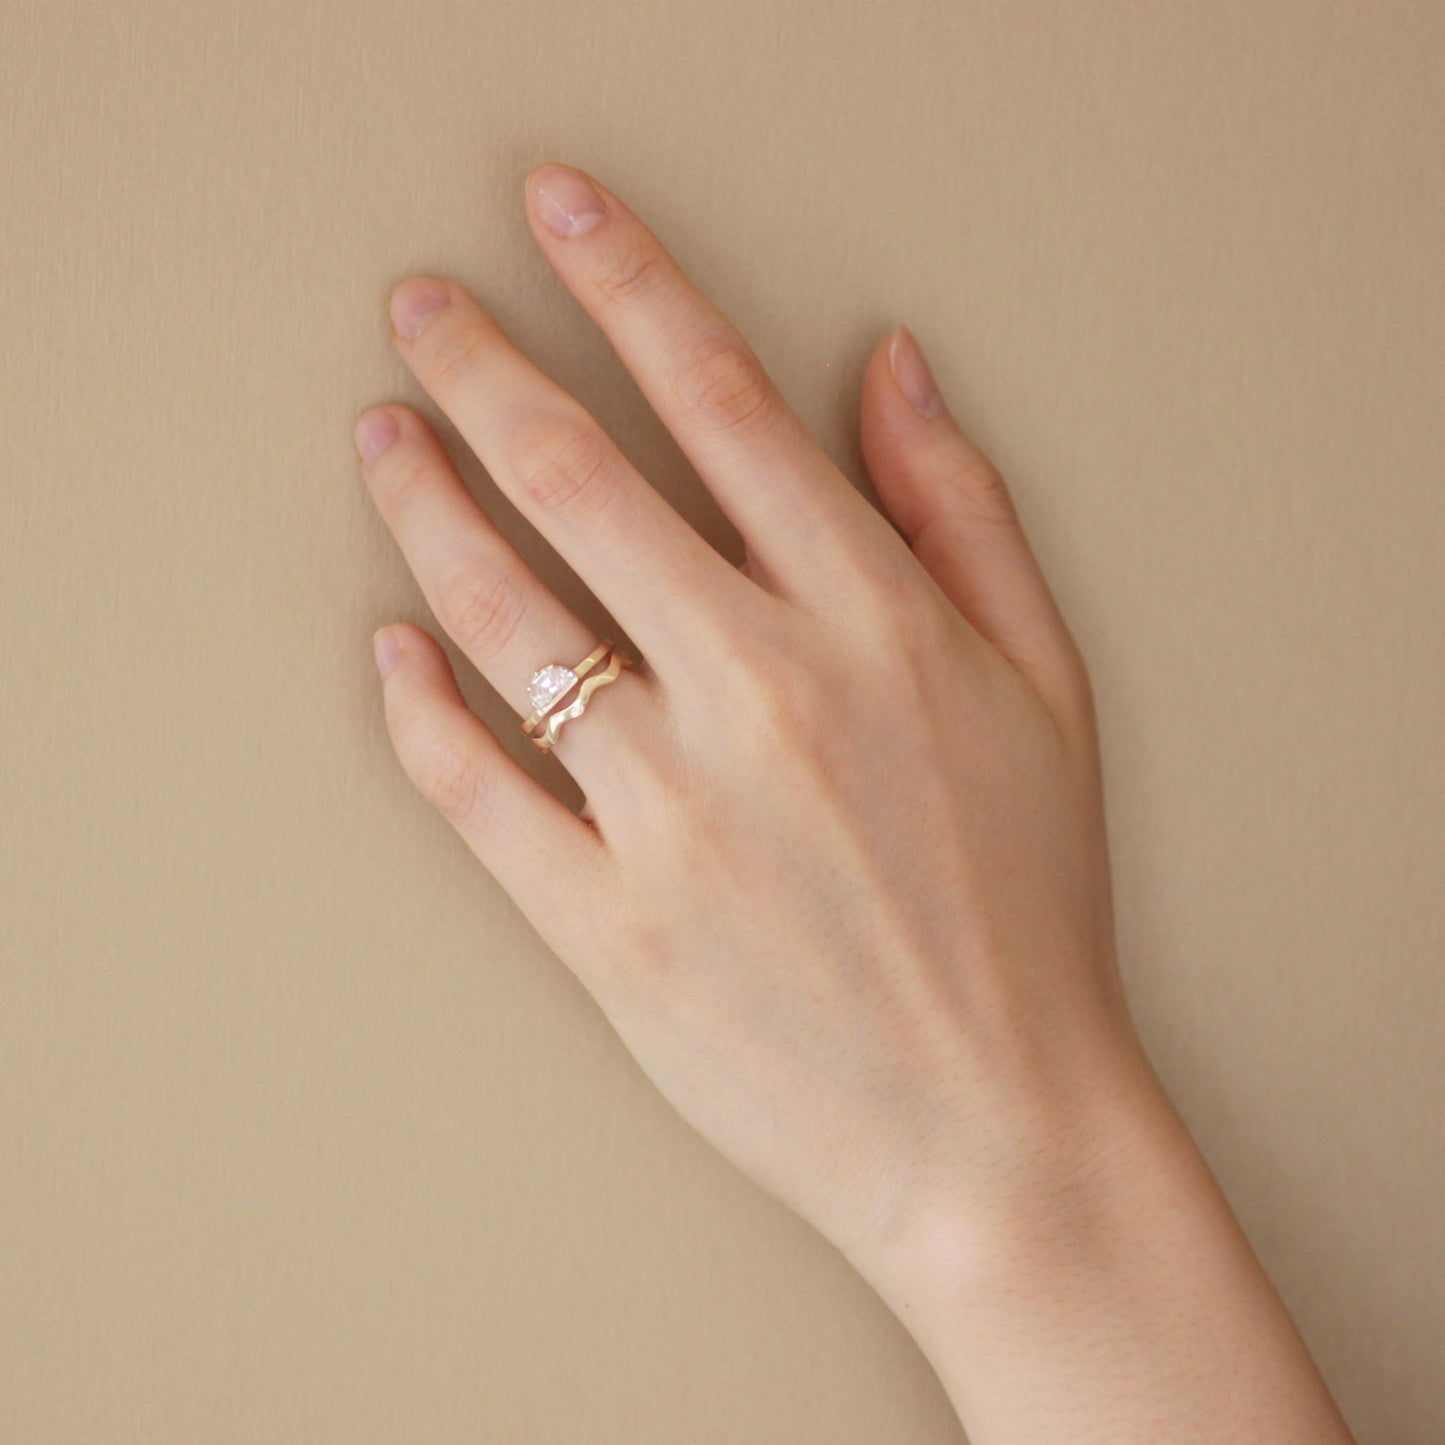 Waves Ring Thin / Gold - Goldpoint Studio - Greenpoint, Brooklyn - Fine Jewelry